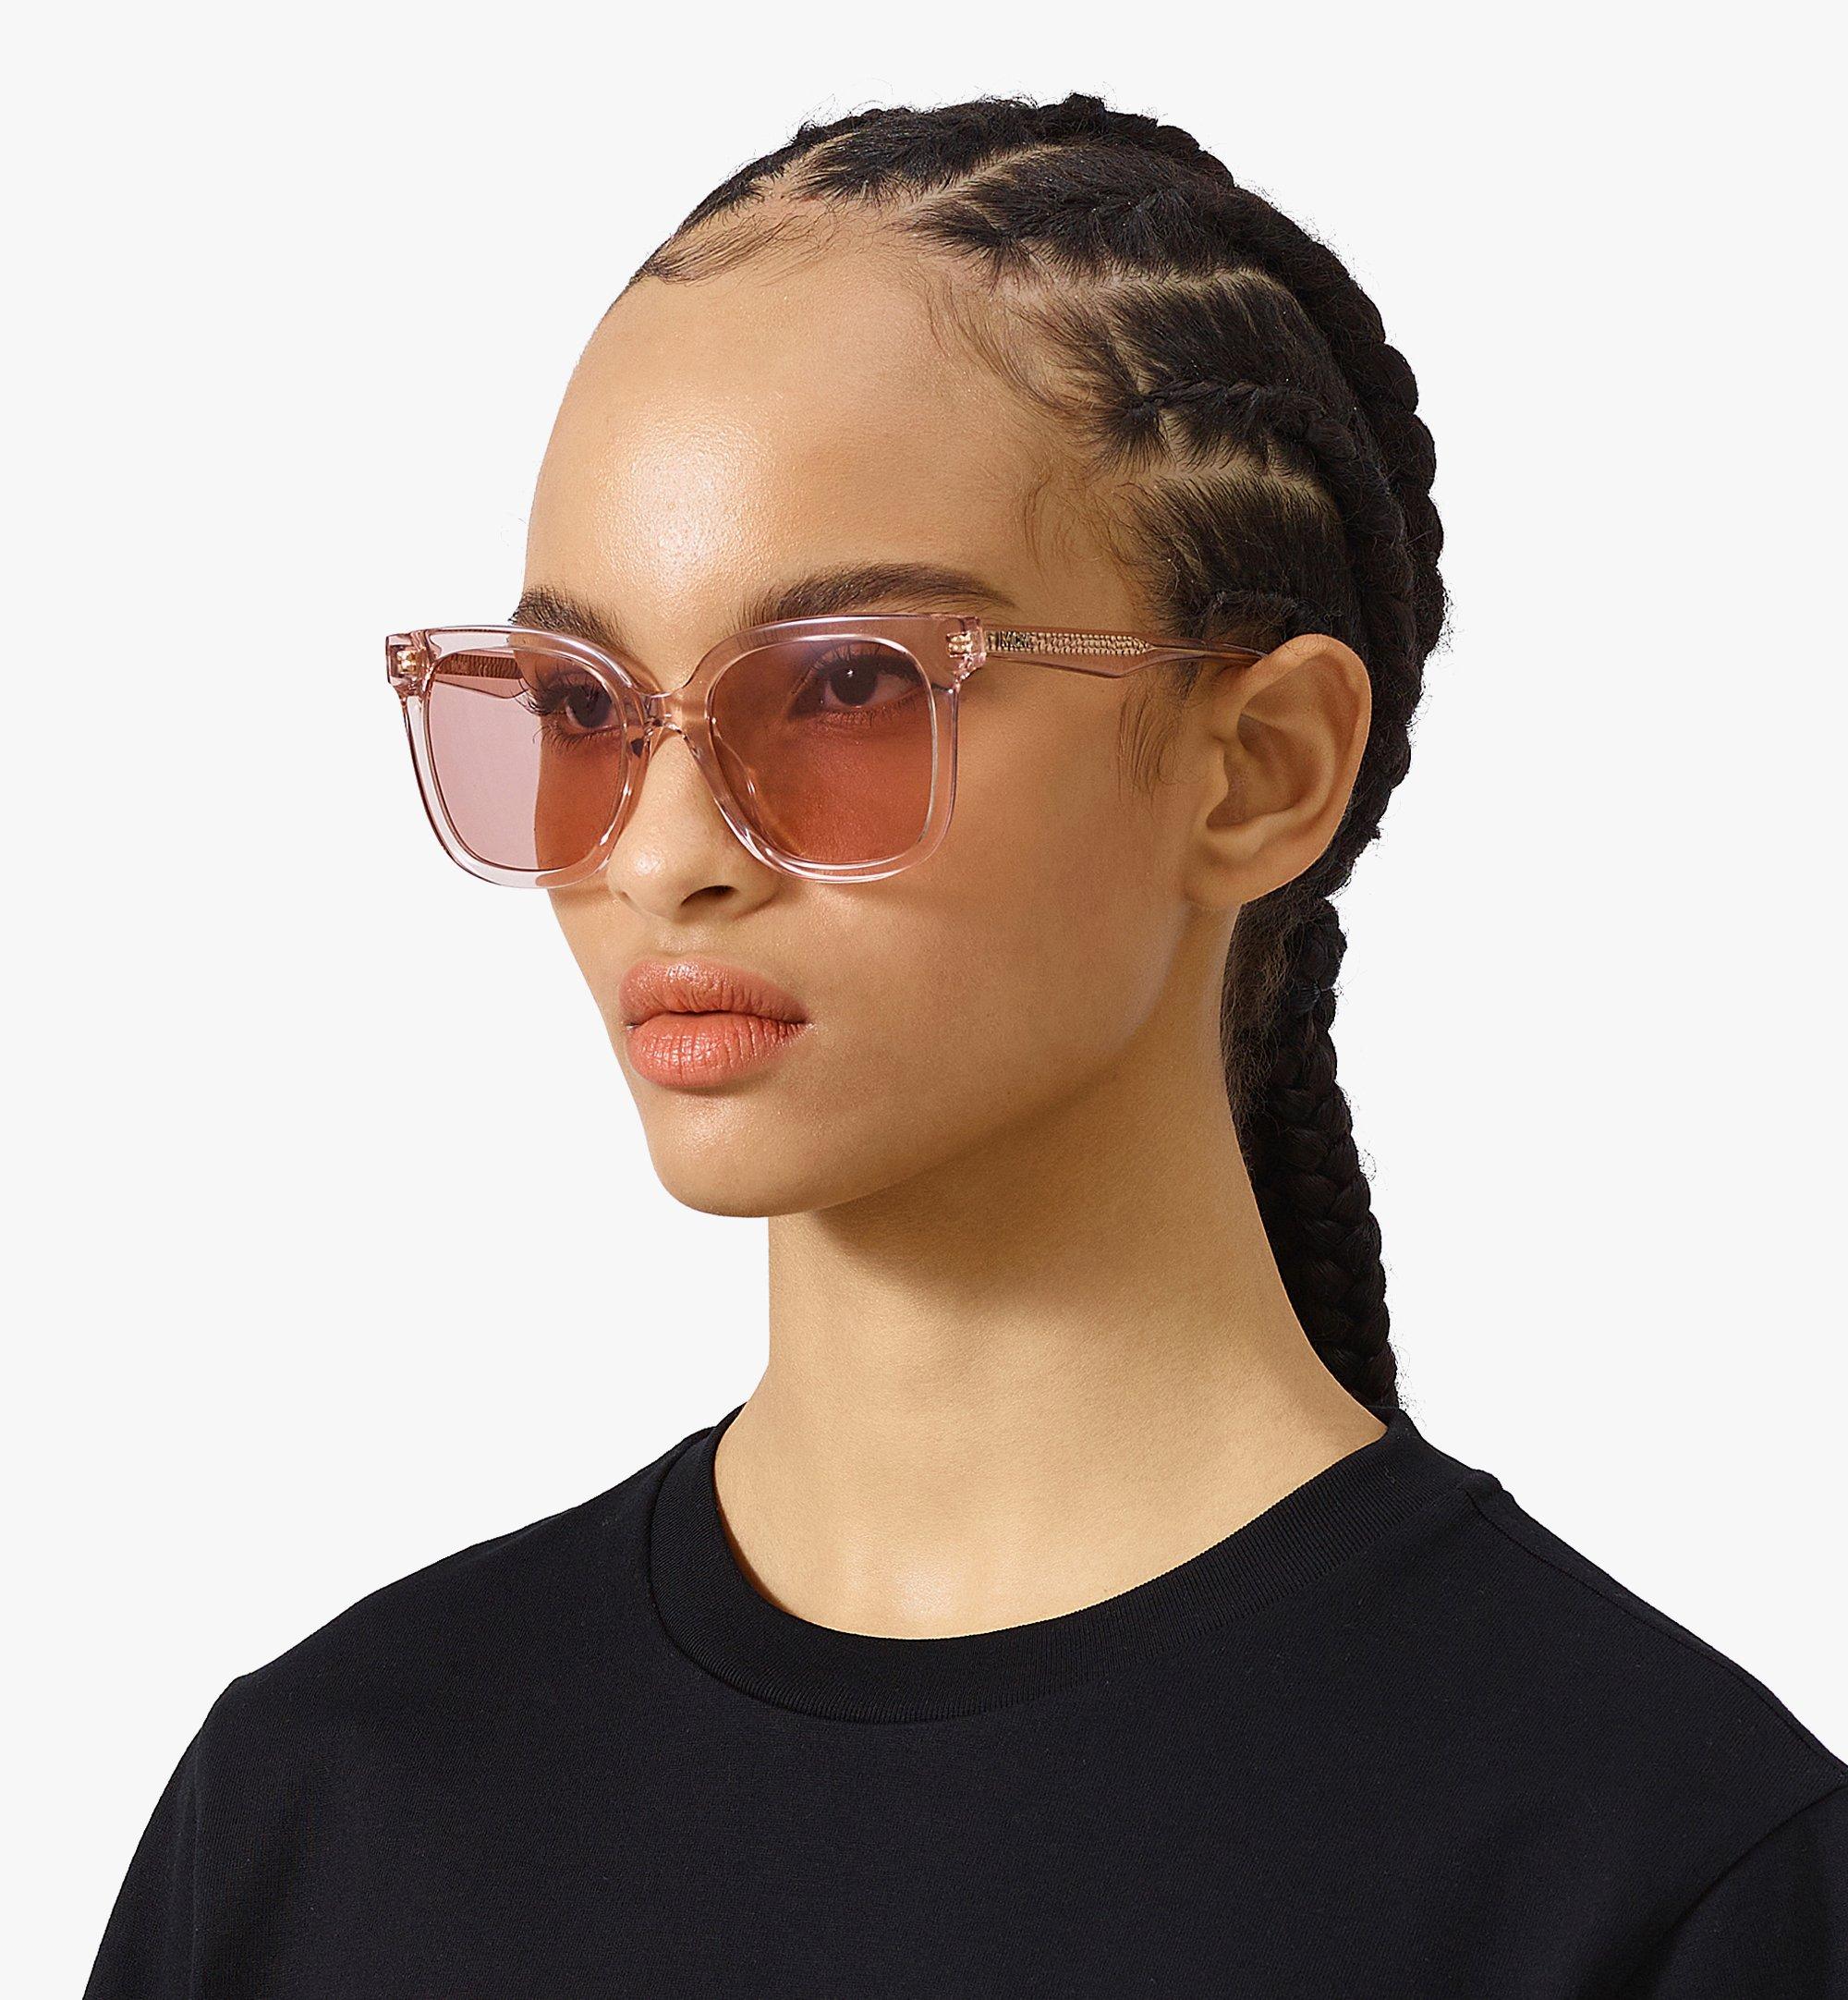 One Size MCM725S Square Sunglasses Pink | MCM ®US